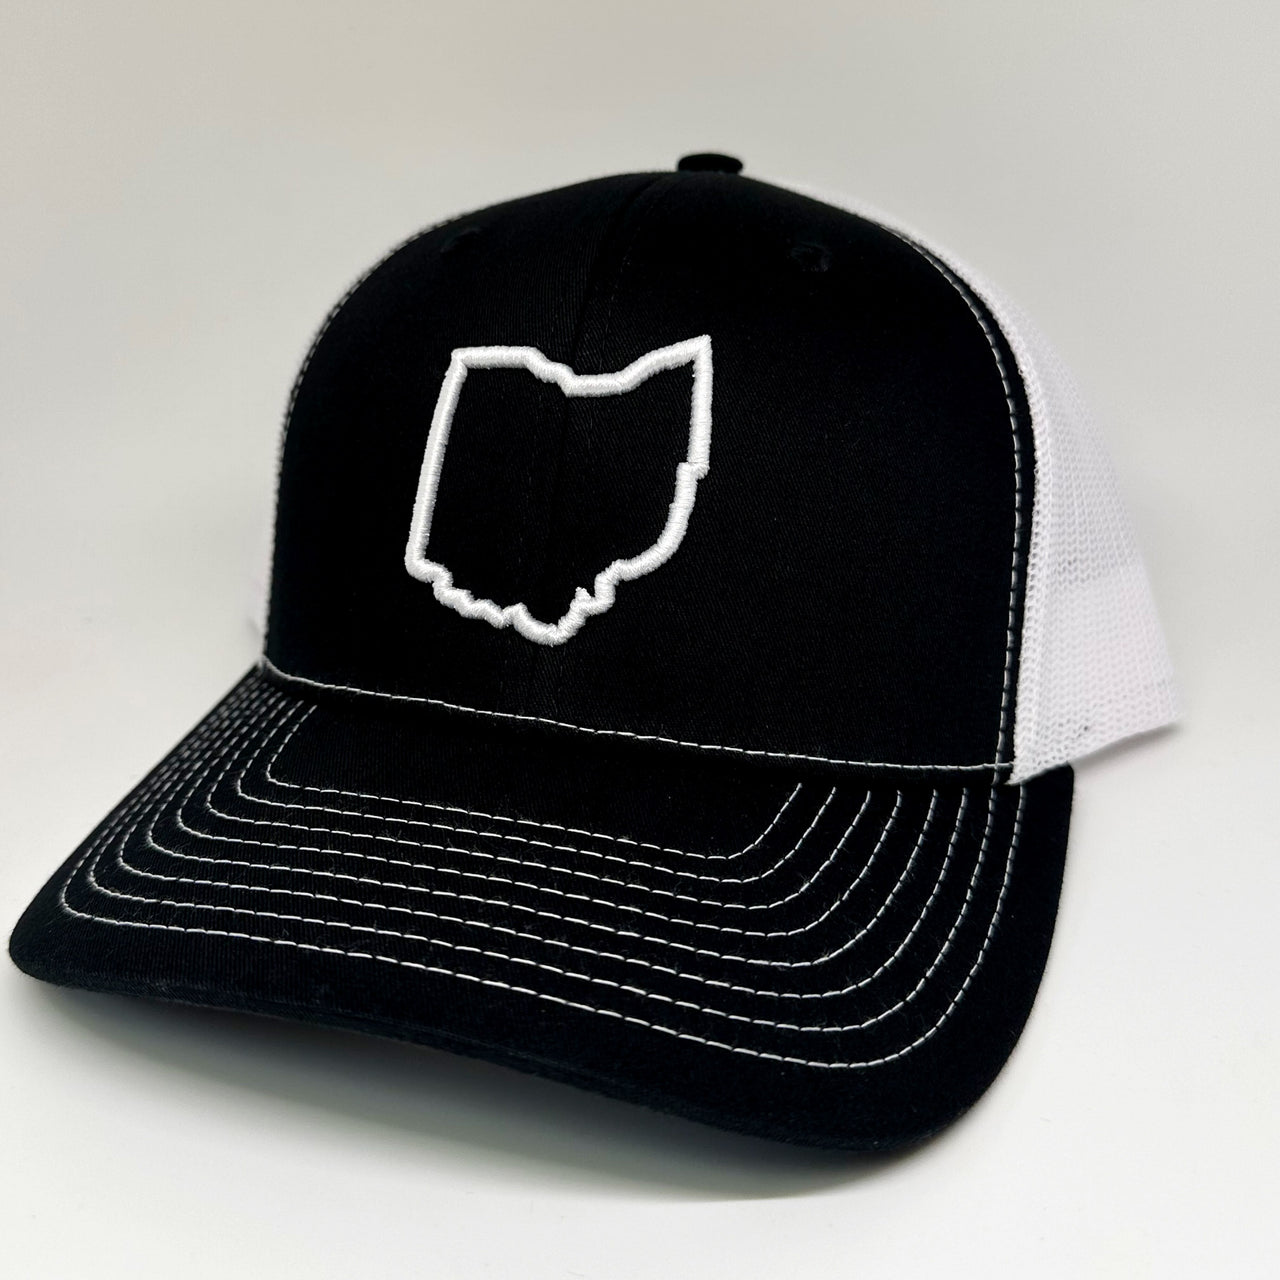 Ohio Embroidery Hat - Greater Half